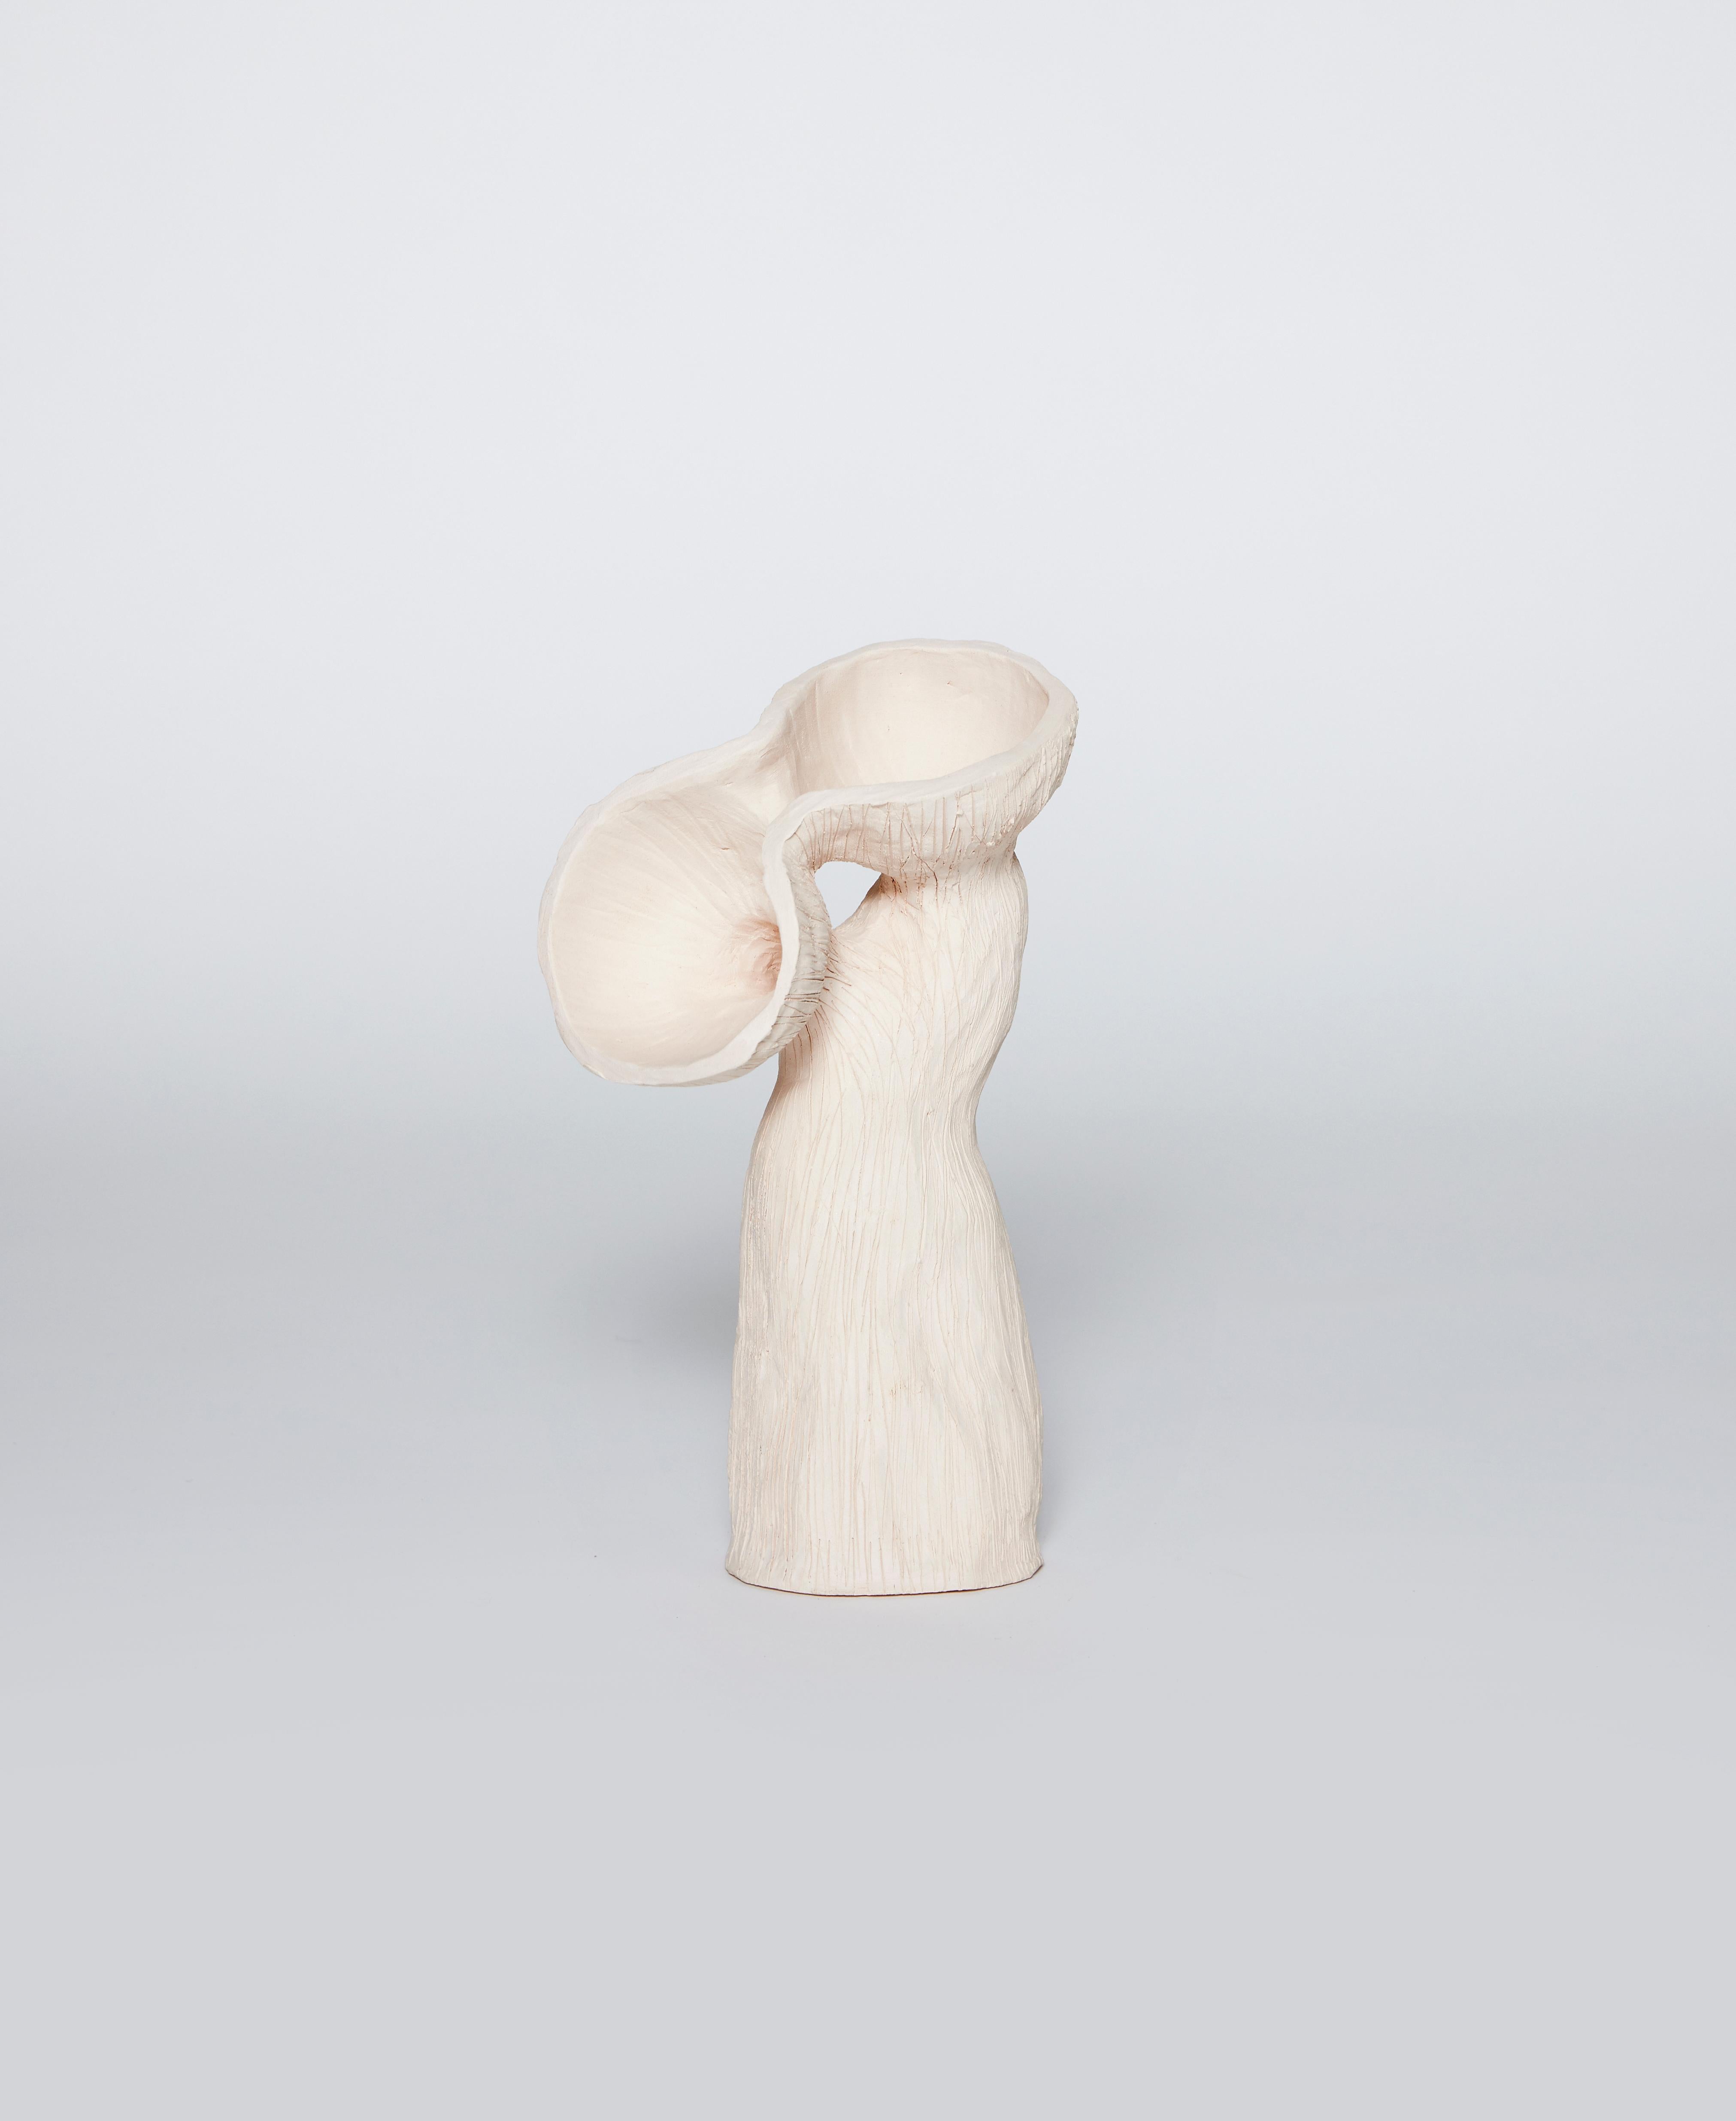 Large Pod vessel 02 by Jan Ernst
Dimensions: Height 35 cm
Also available in Height 25 cm.
Materials: White stoneware, terracotta, glazed
Also available in unglazed.

Jan Ernst’s work takes on an experimental approach, as he prefers making